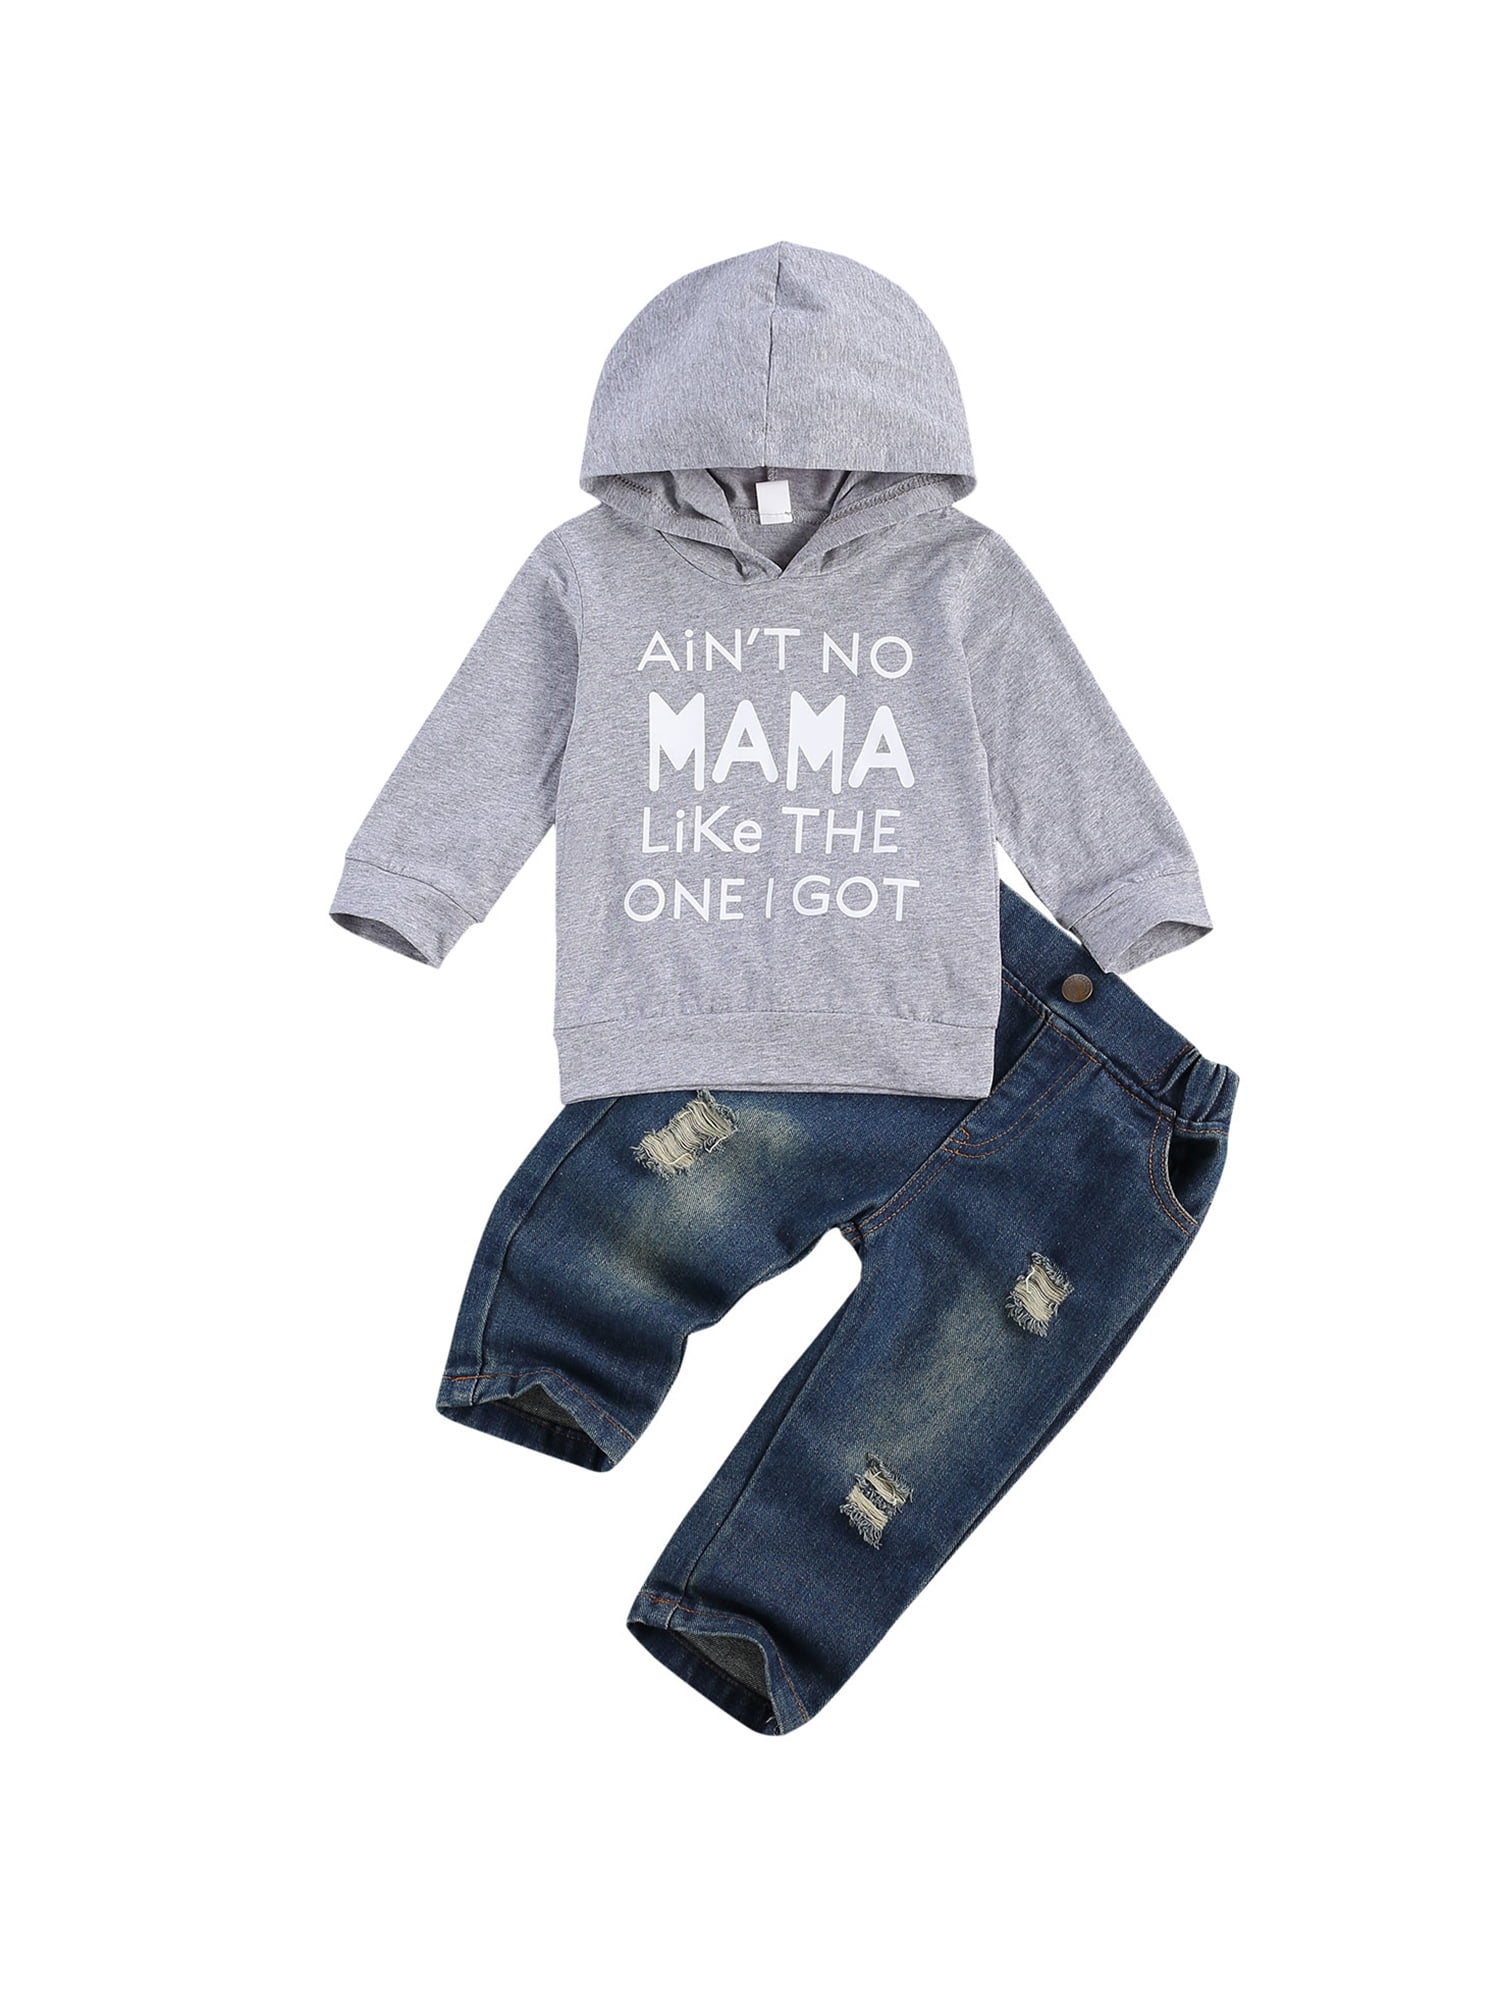 Toddler Baby Boy Outfits Hoodie Sweatshirts & Jeans Clothes Set Fall Winter 6 9 12 18 24 Months